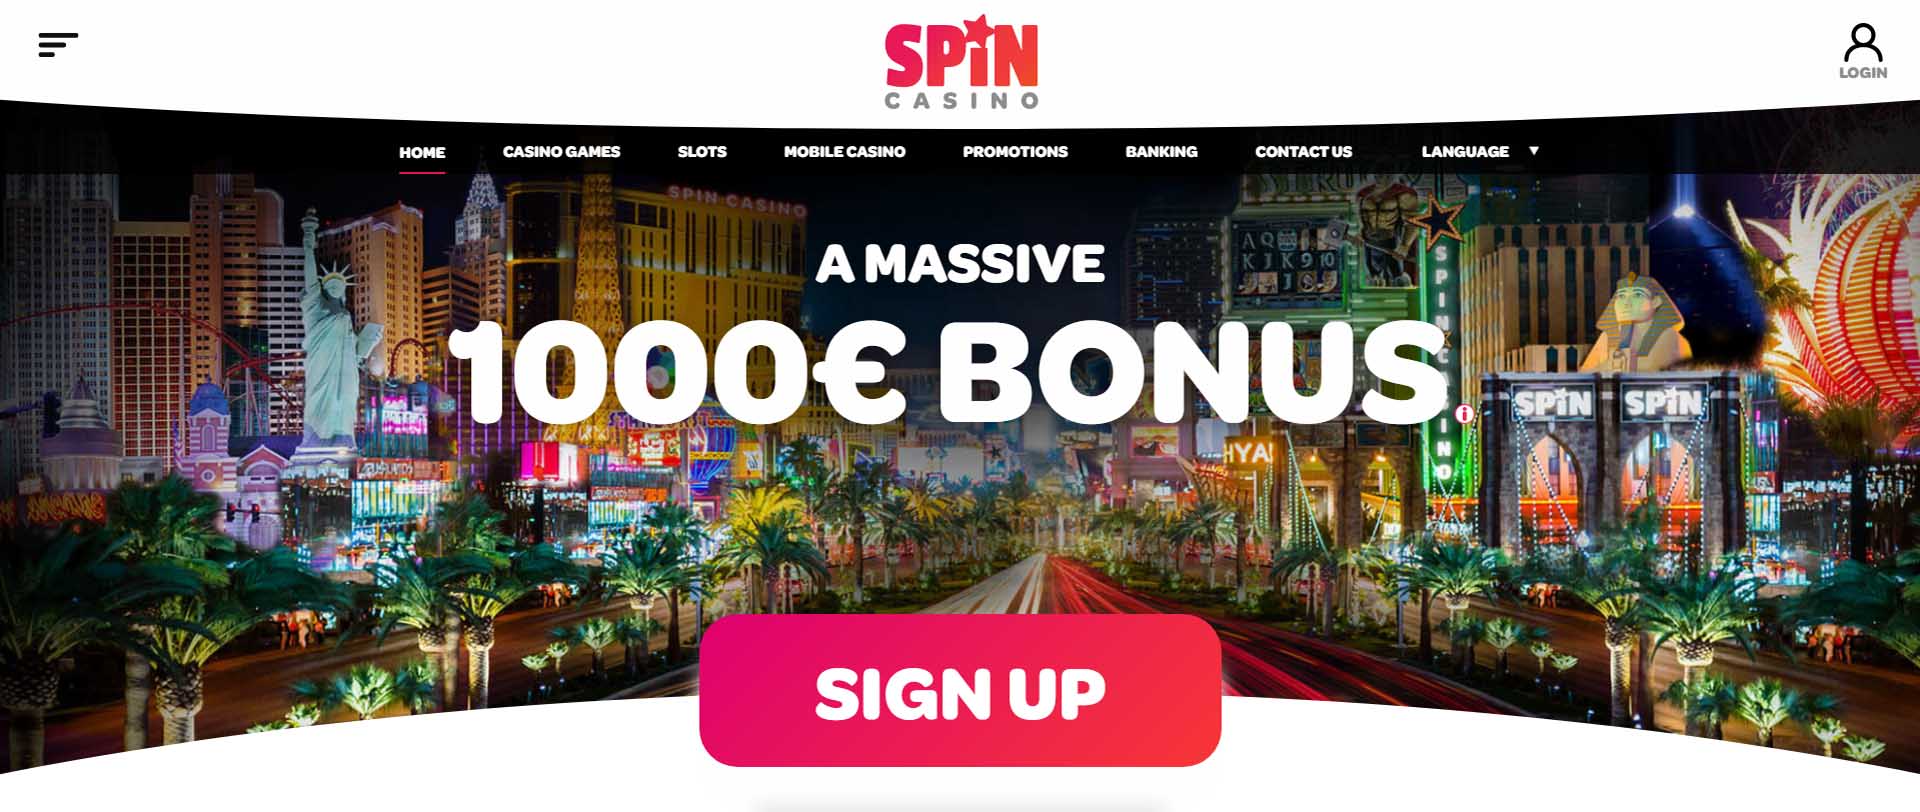 Spin Casino Review - What You Should Know About This Online Slots Casino